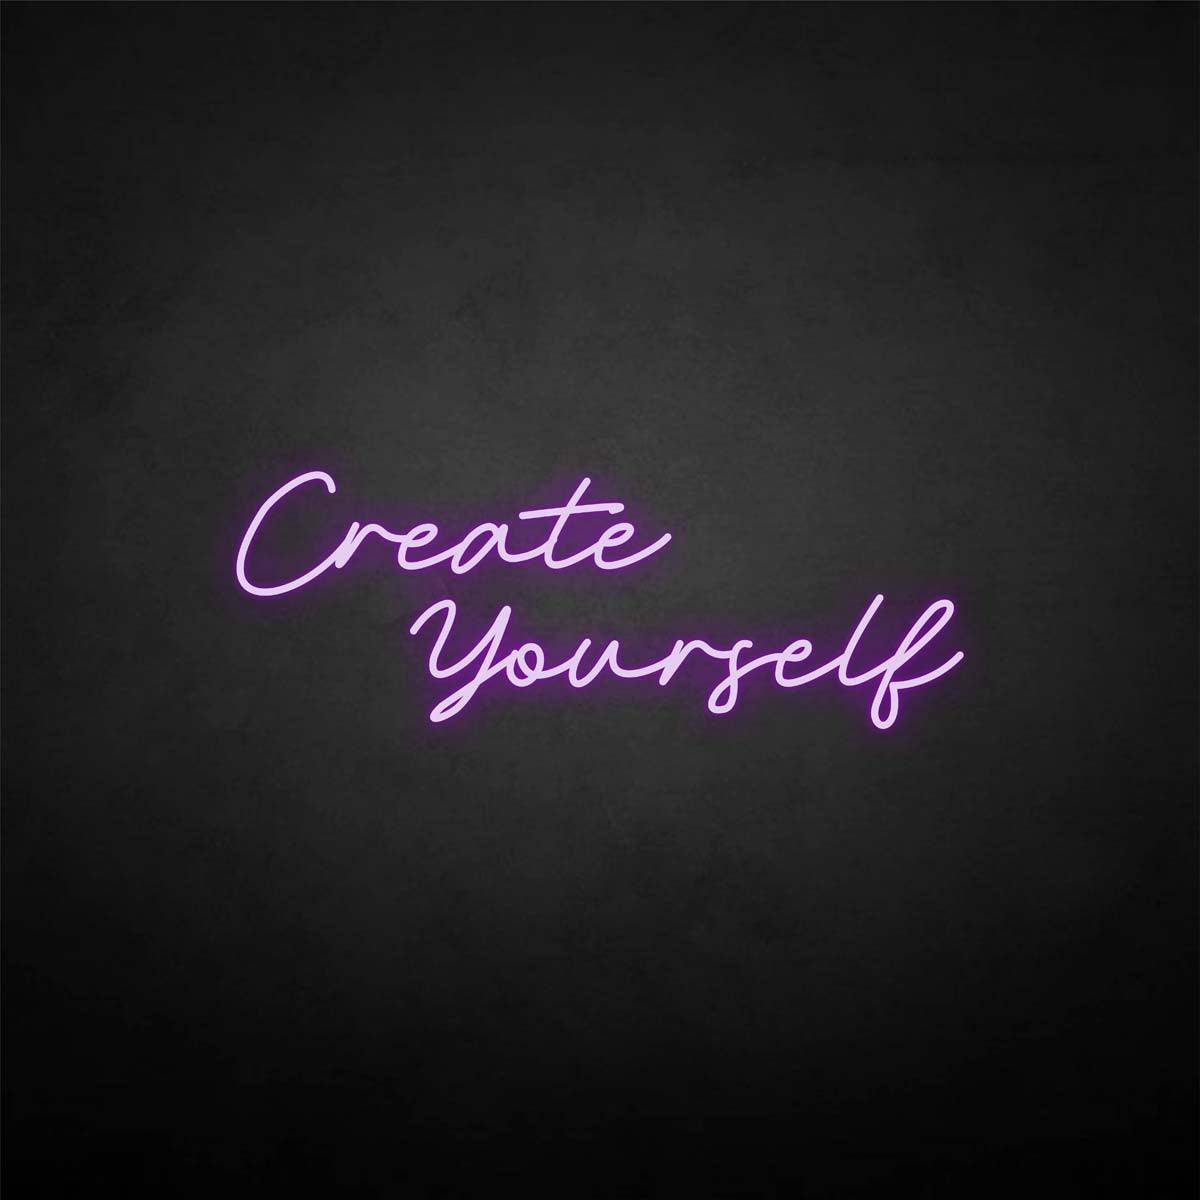 'Create yourself' neon sign